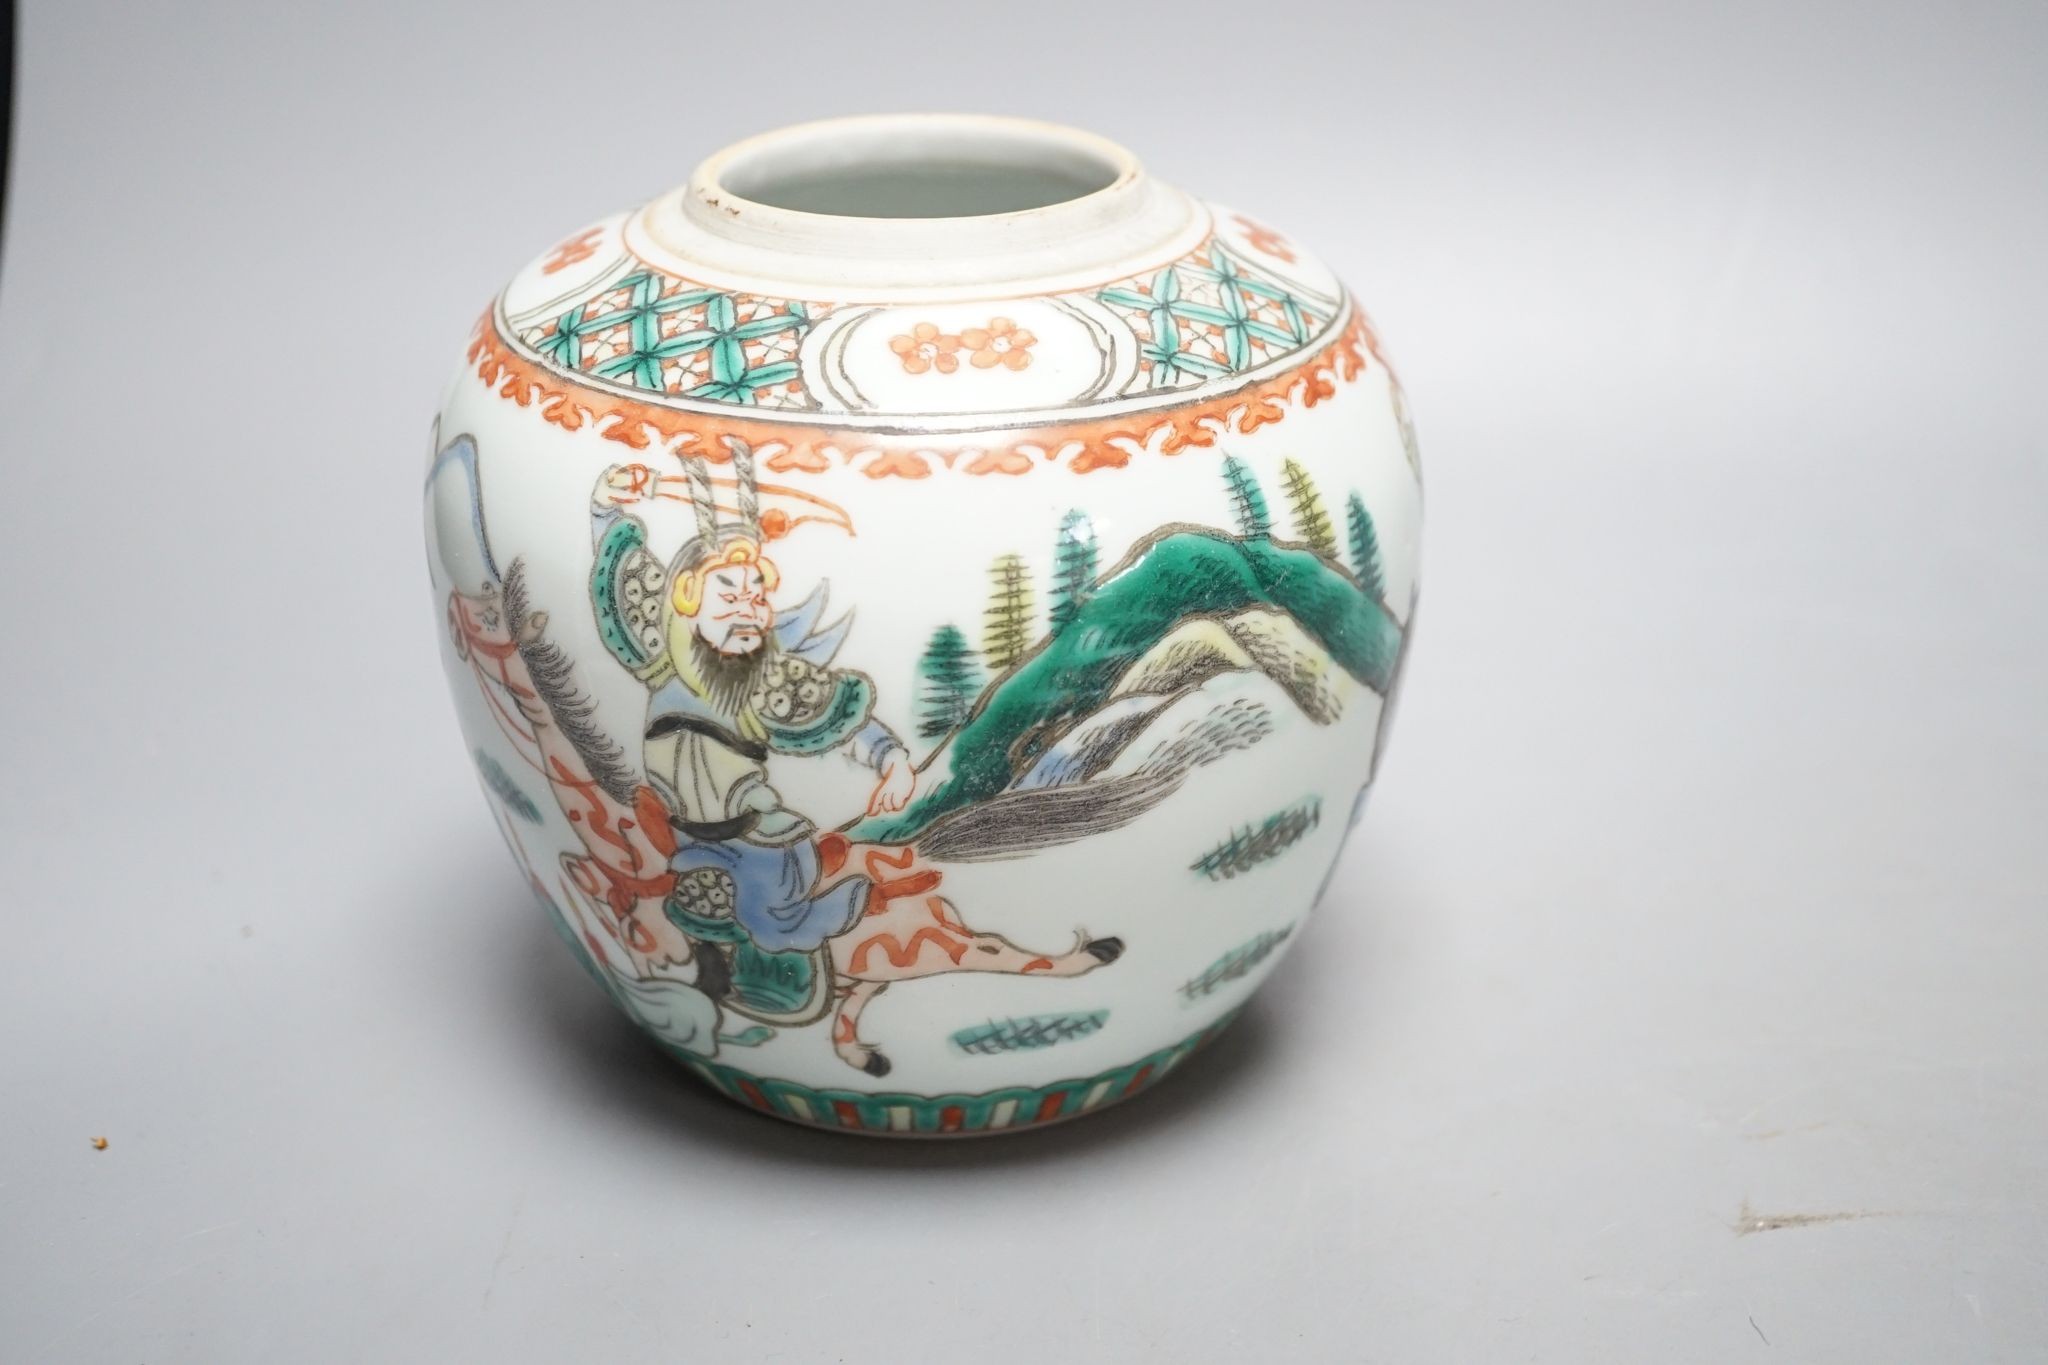 A Chinese famille verte jar, a Chinese enamelled porcelain stem dish, a famille rose cup and a Japanese Satsuma pottery model of a bucket, tallest 15.5cm